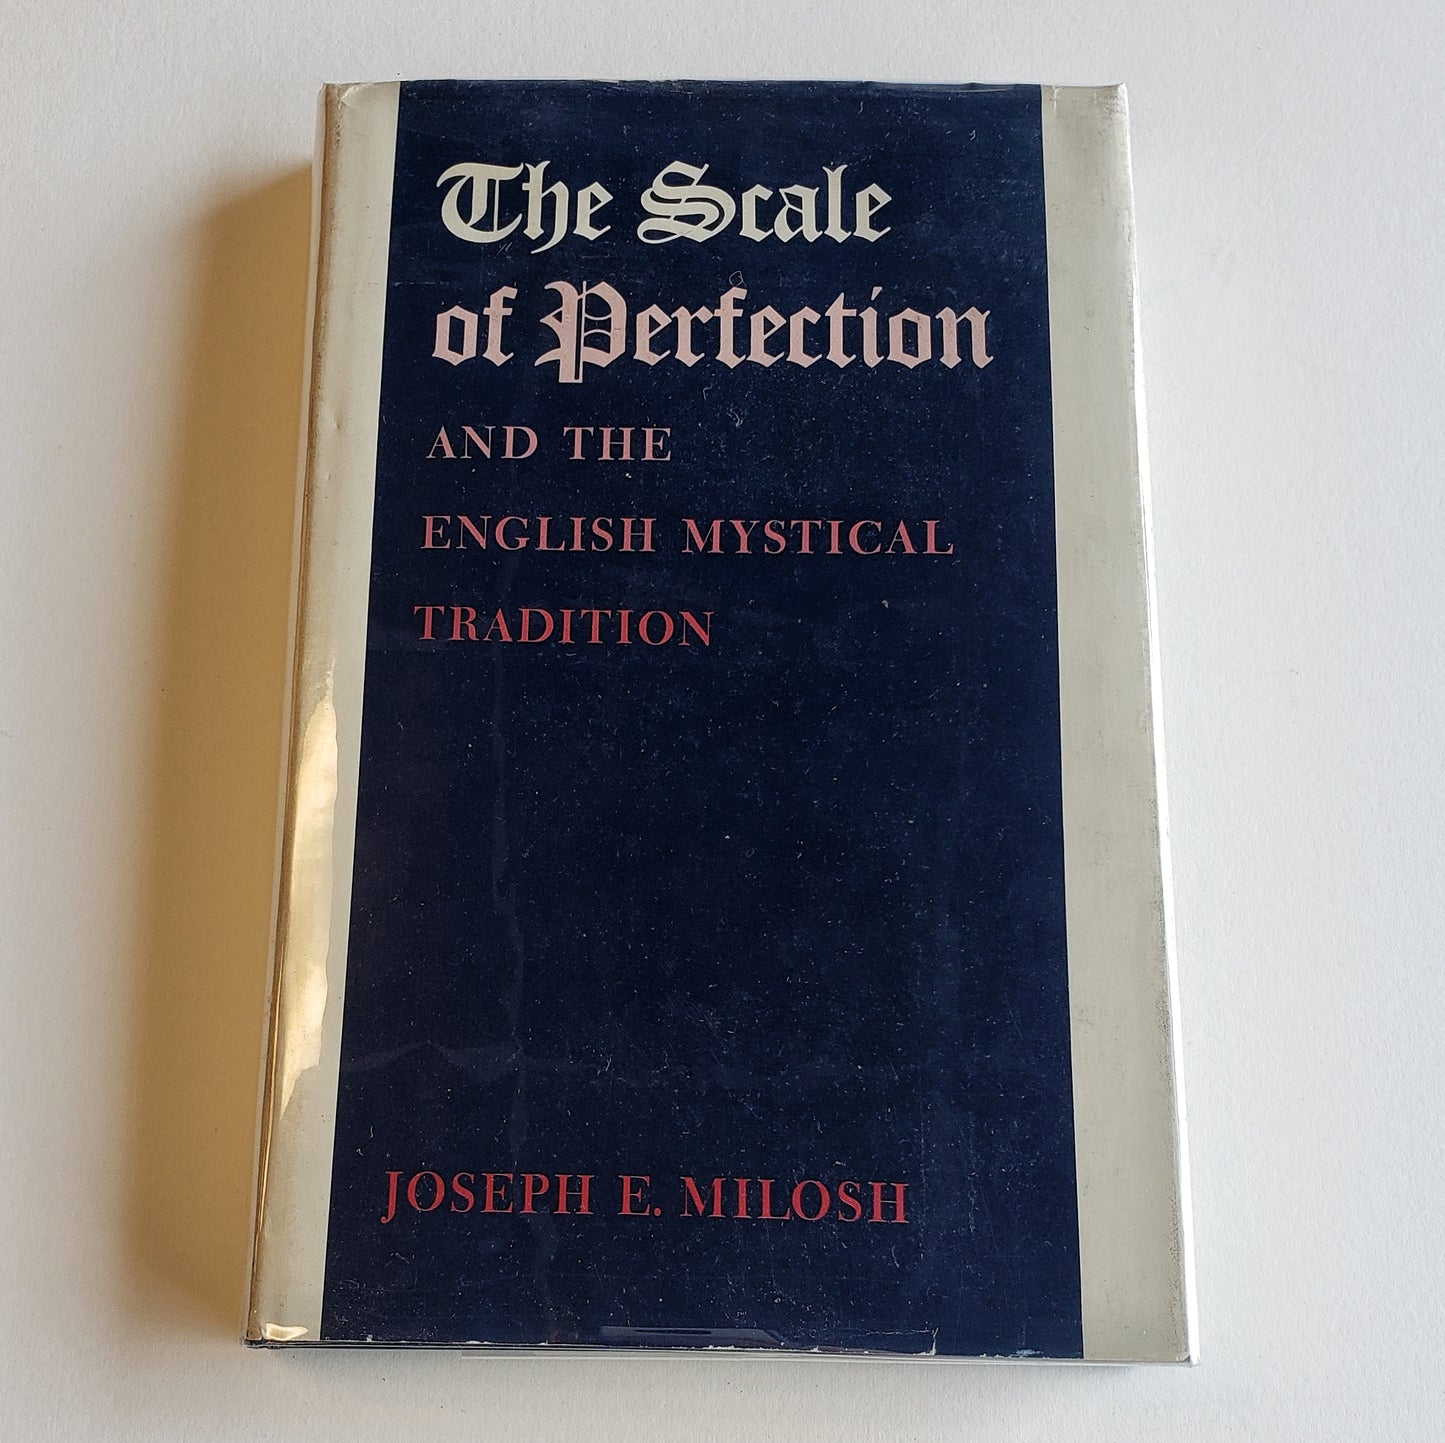 Vintage Book- The Scale of Perfection and the English Mystical Tradition by Joseph E. Milosh (History)